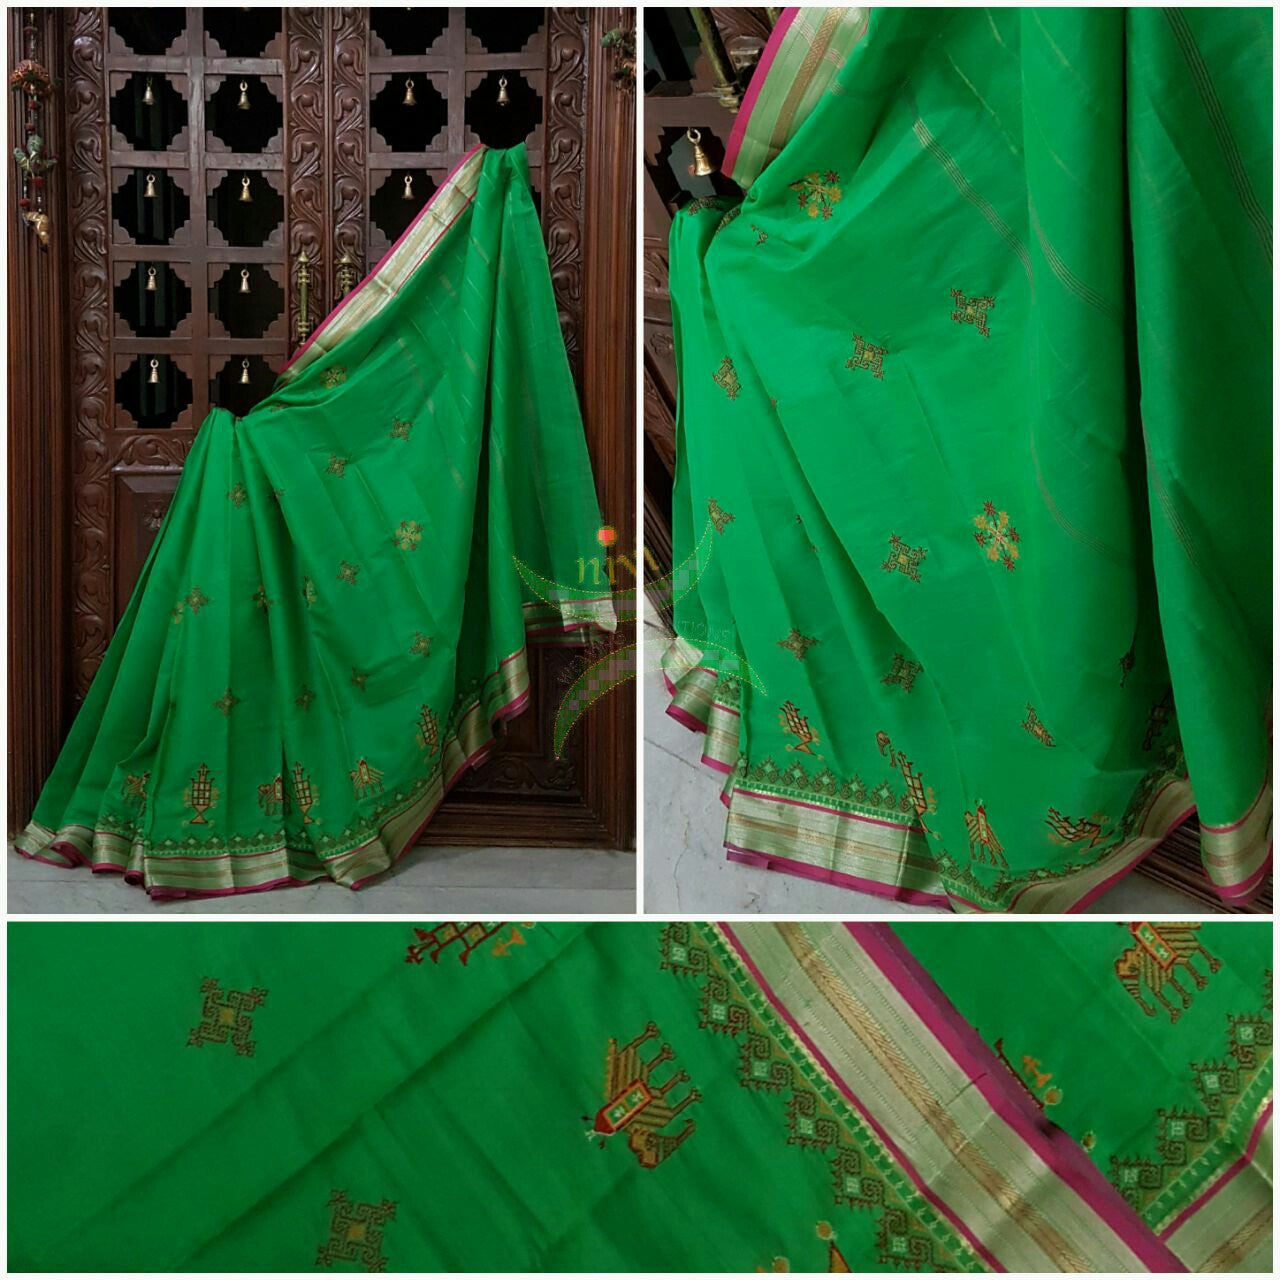 Green with pink kota Cotton saree with kasuti embroidery. Saree is woven with contrasting border and striped pallu.